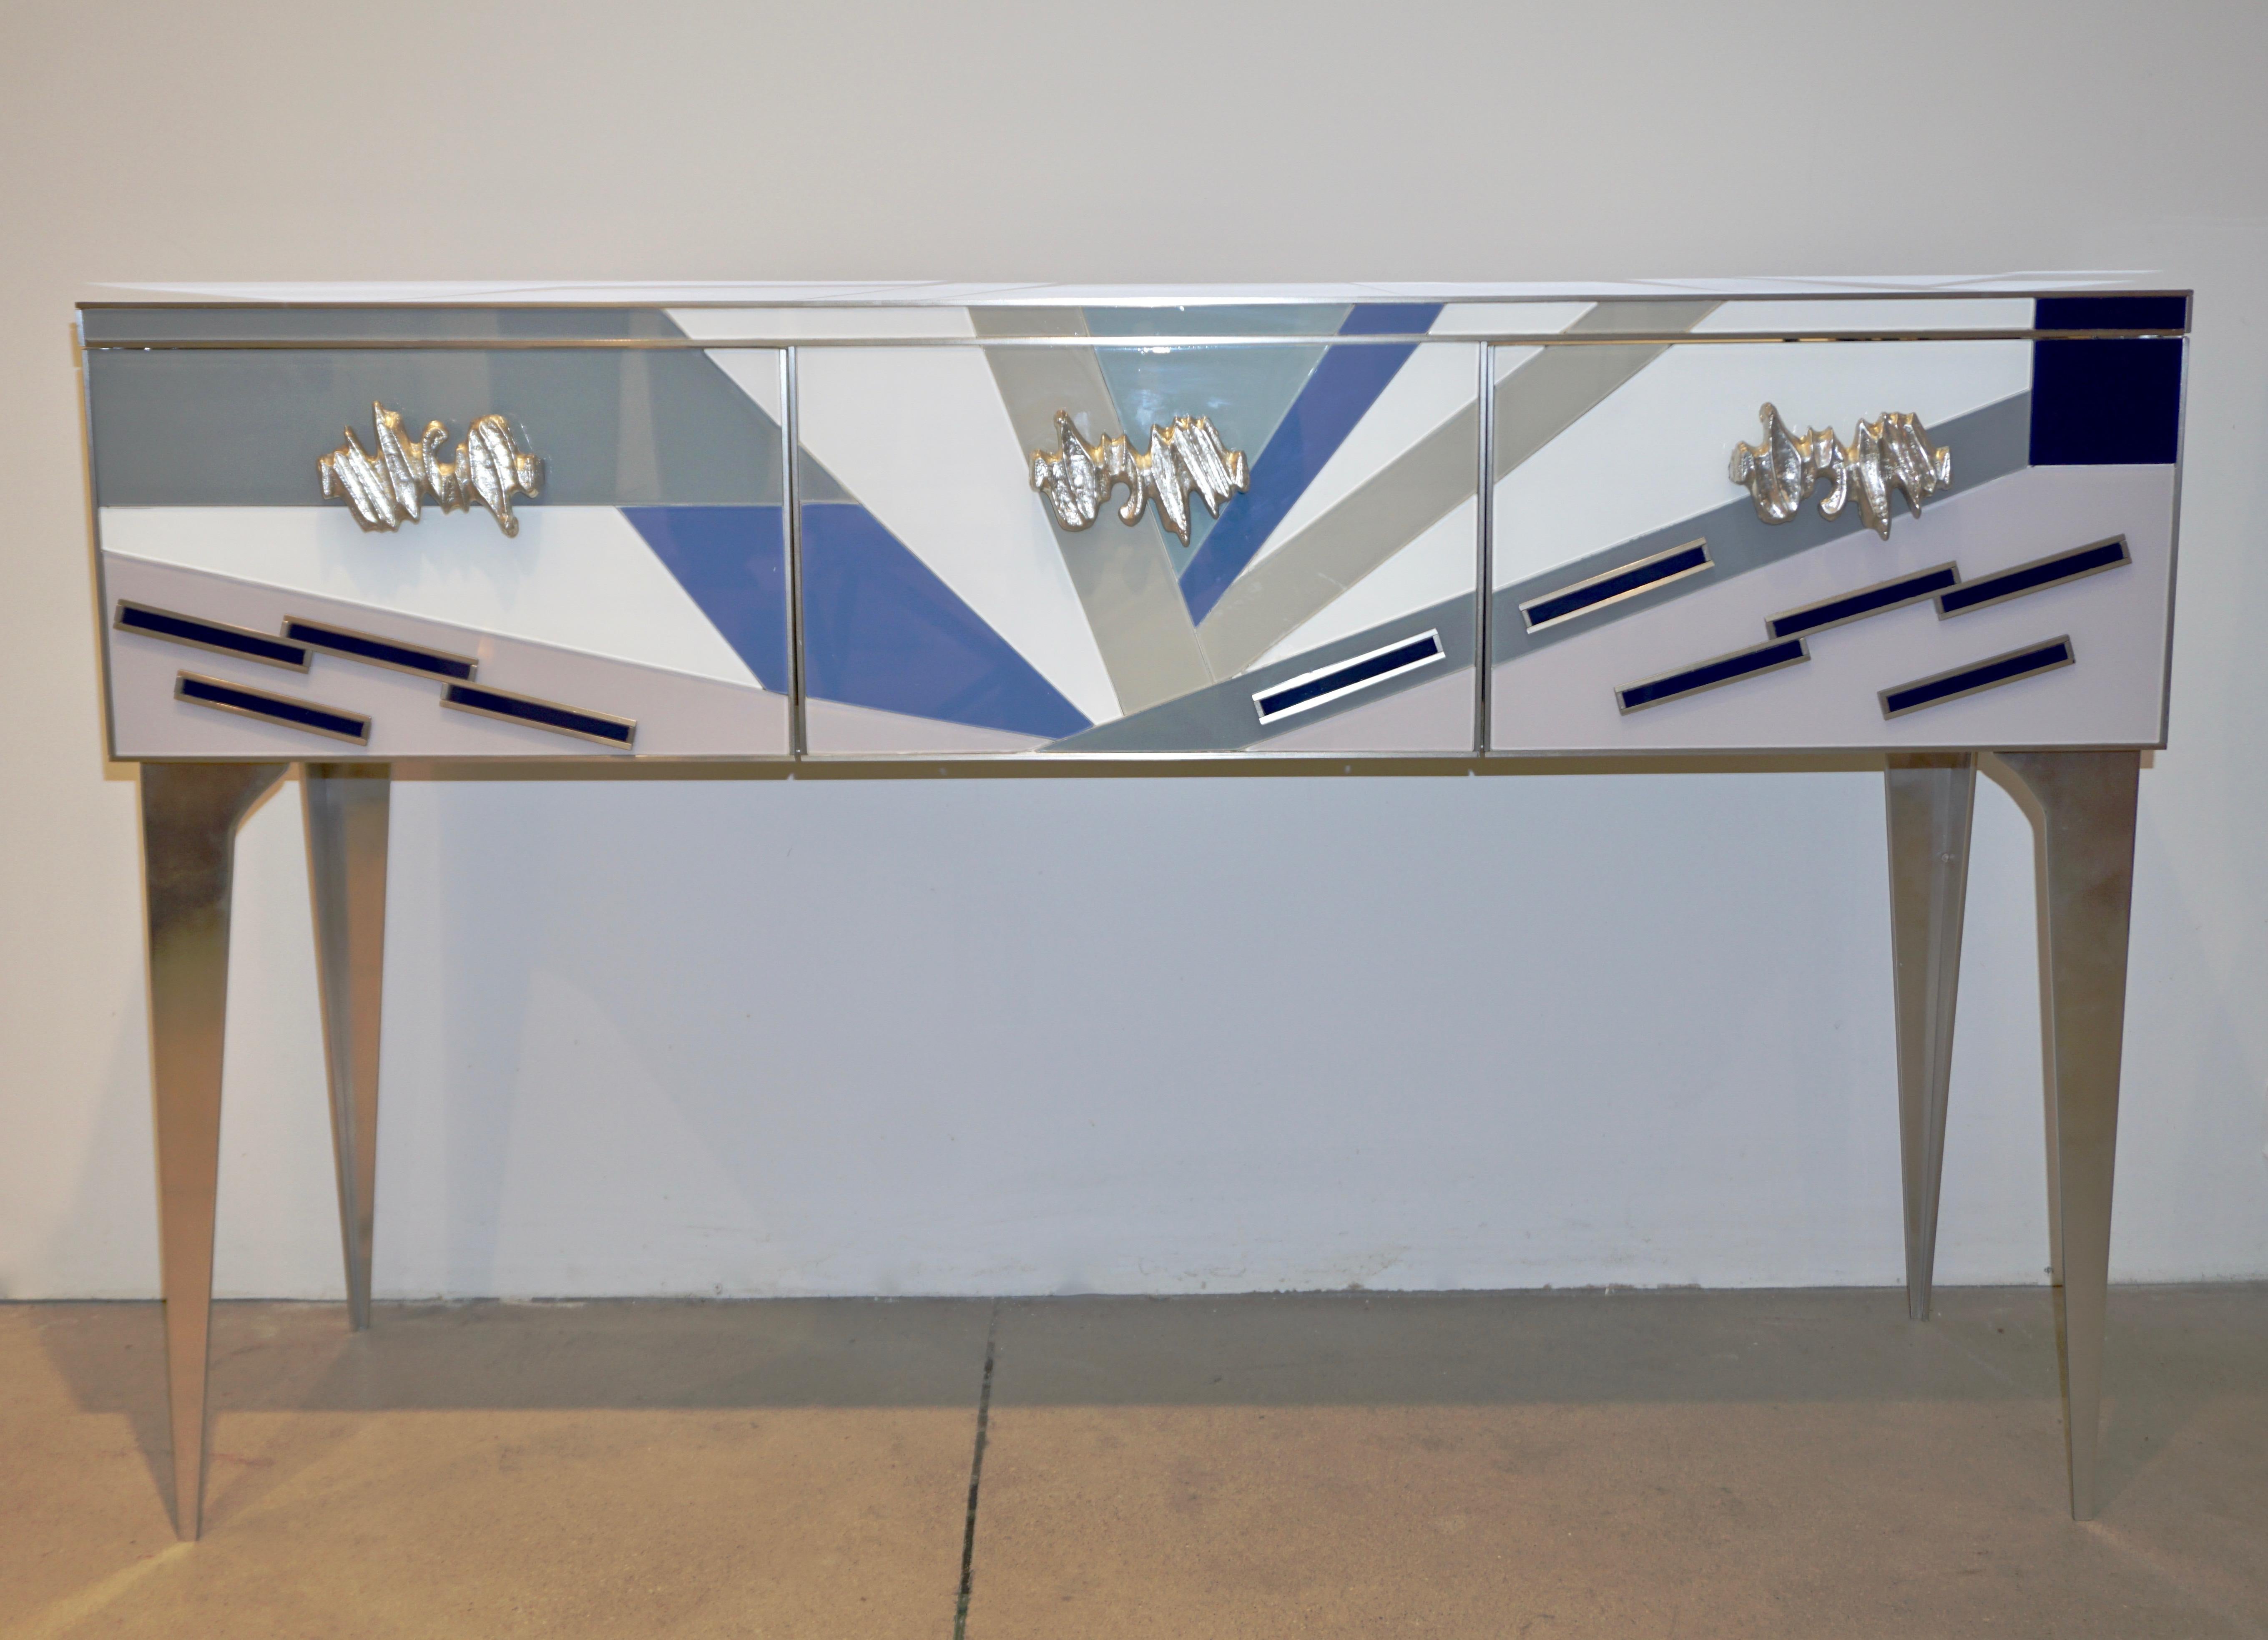 An interesting colorful piece with Pop Art flair, very fun Italian modernist credenza/cabinet with the advantage of a shallow body, 3 front panel design with fixed center panel and 2 side doors, highlighted with nickel trims. The very enticing